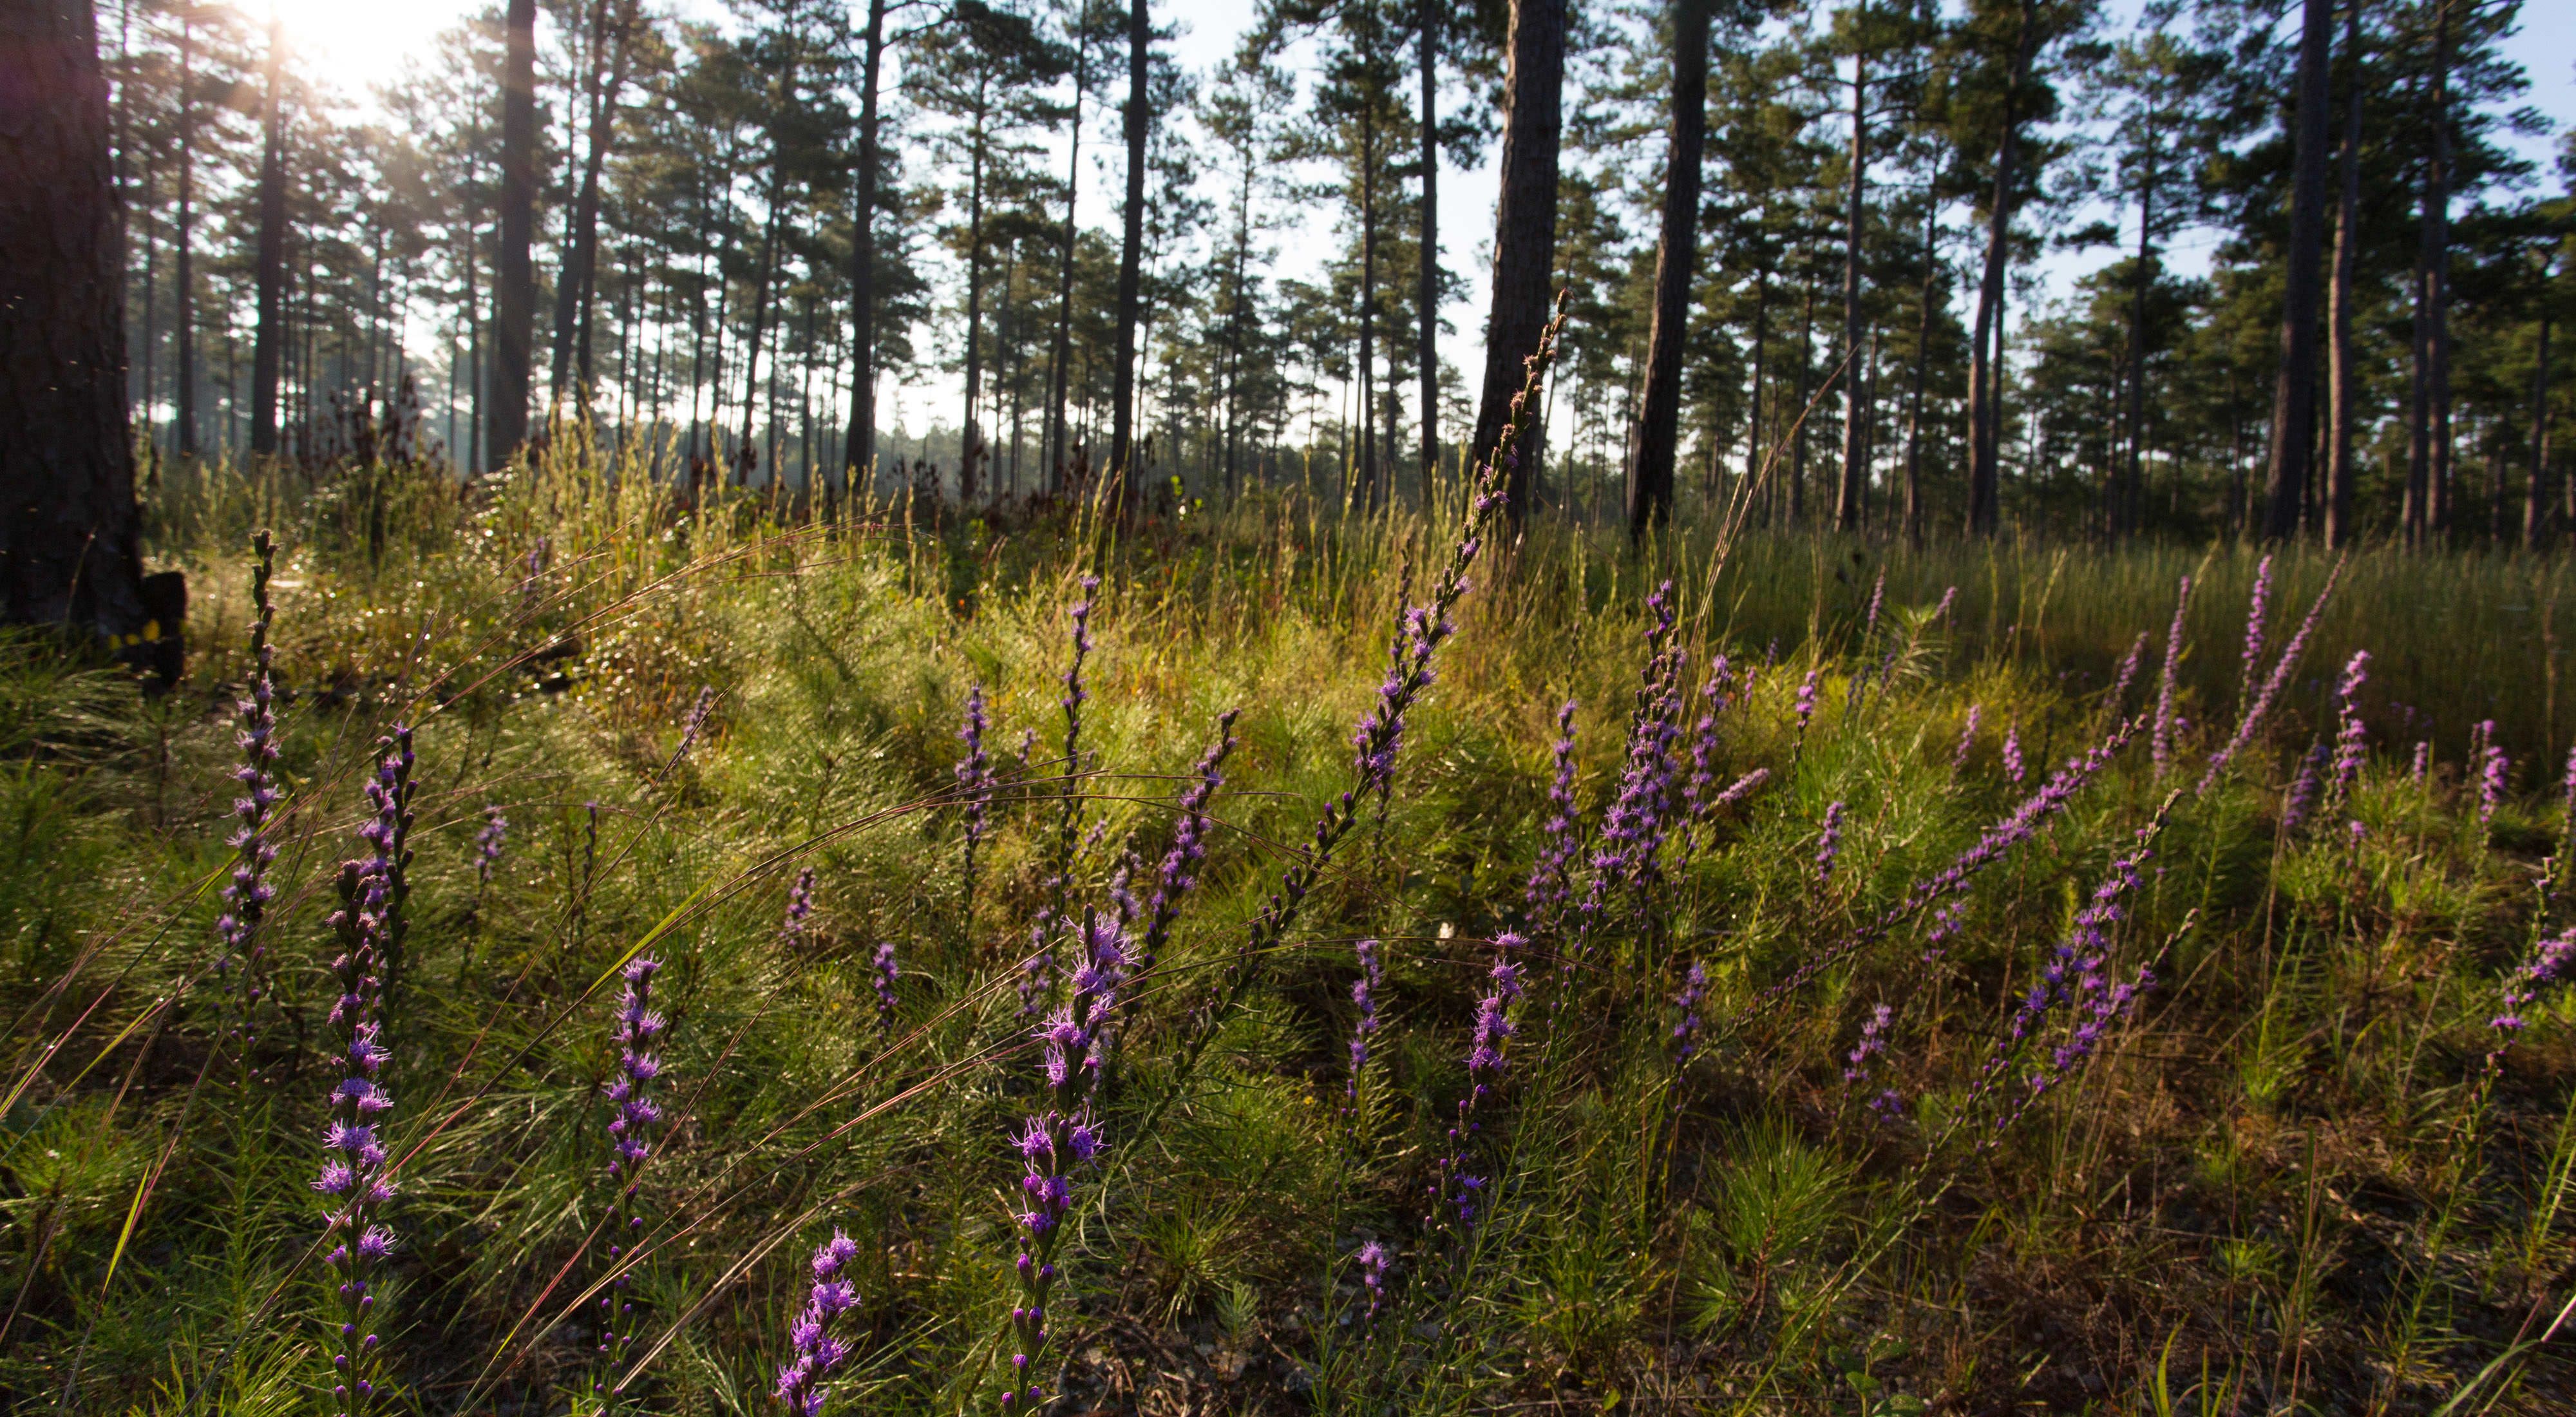 Late afternoon sunlight filters through tall pine trees illuminating a patch of tall grasses and flowering purple plants.